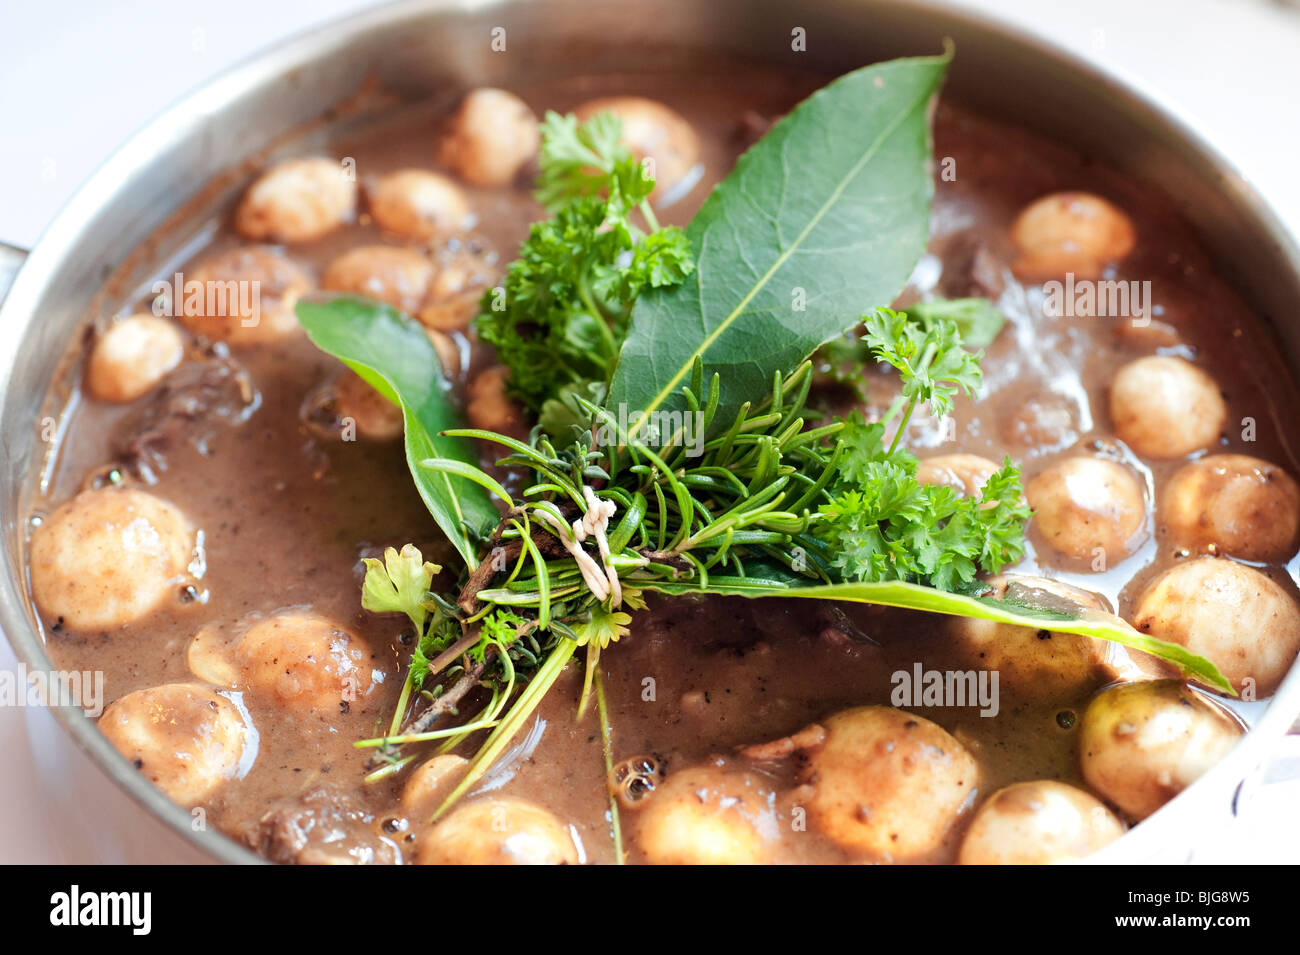 Classic French Boeuf a la Bourguignon Beef Burgundy dish with mushrooms and fresh bouquet garni ready for the oven Stock Photo